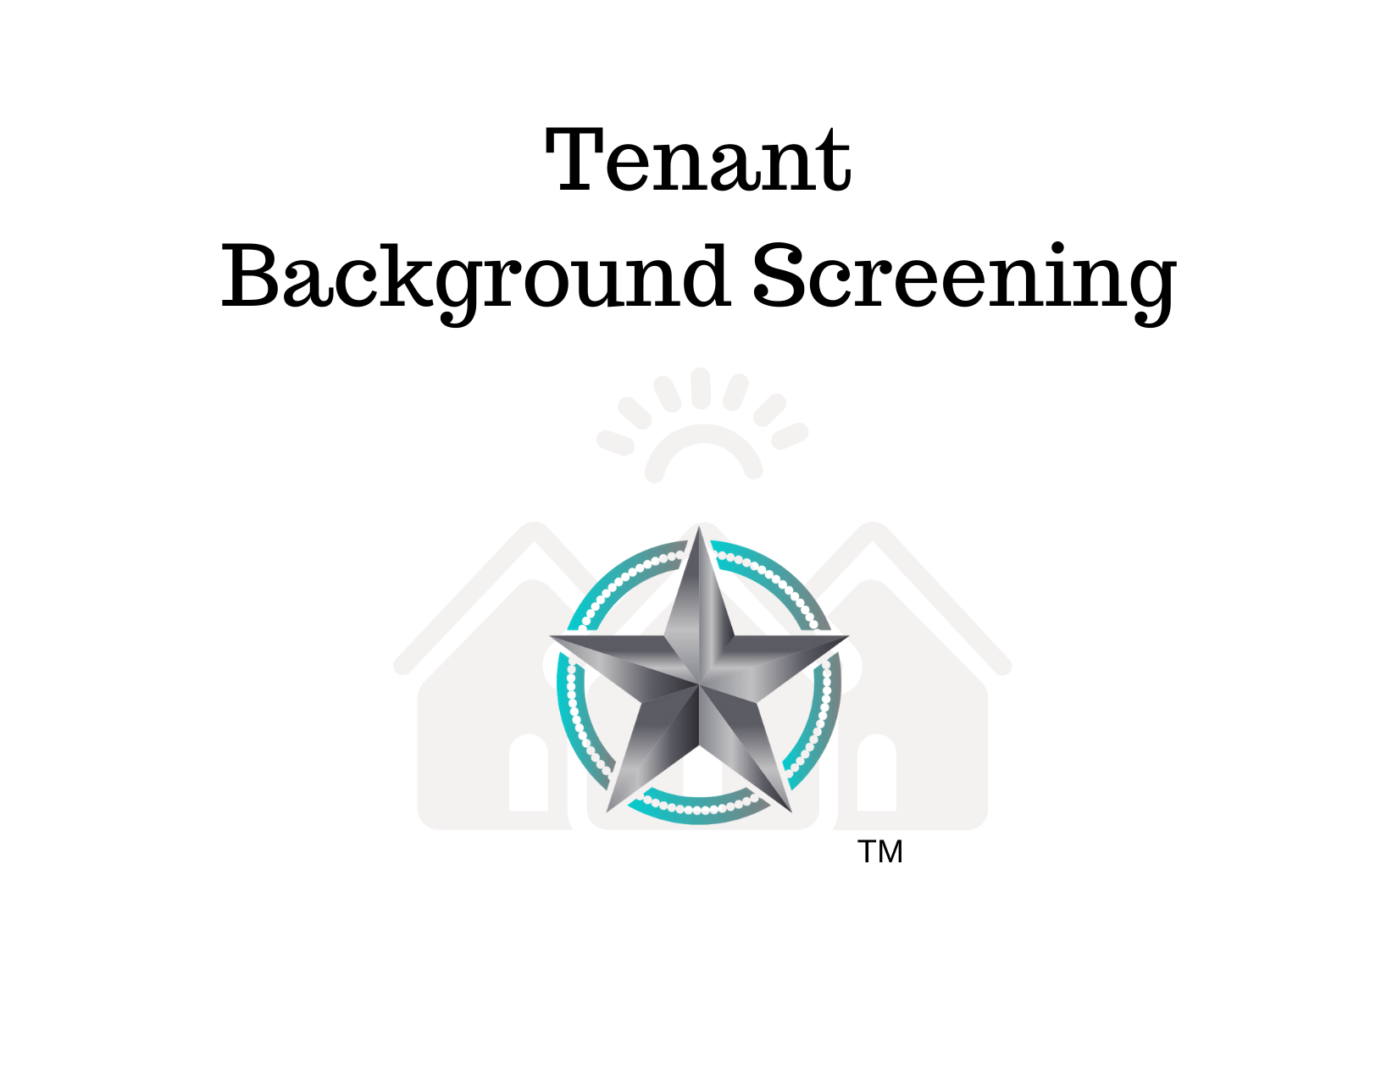 A poster about tenant background screening